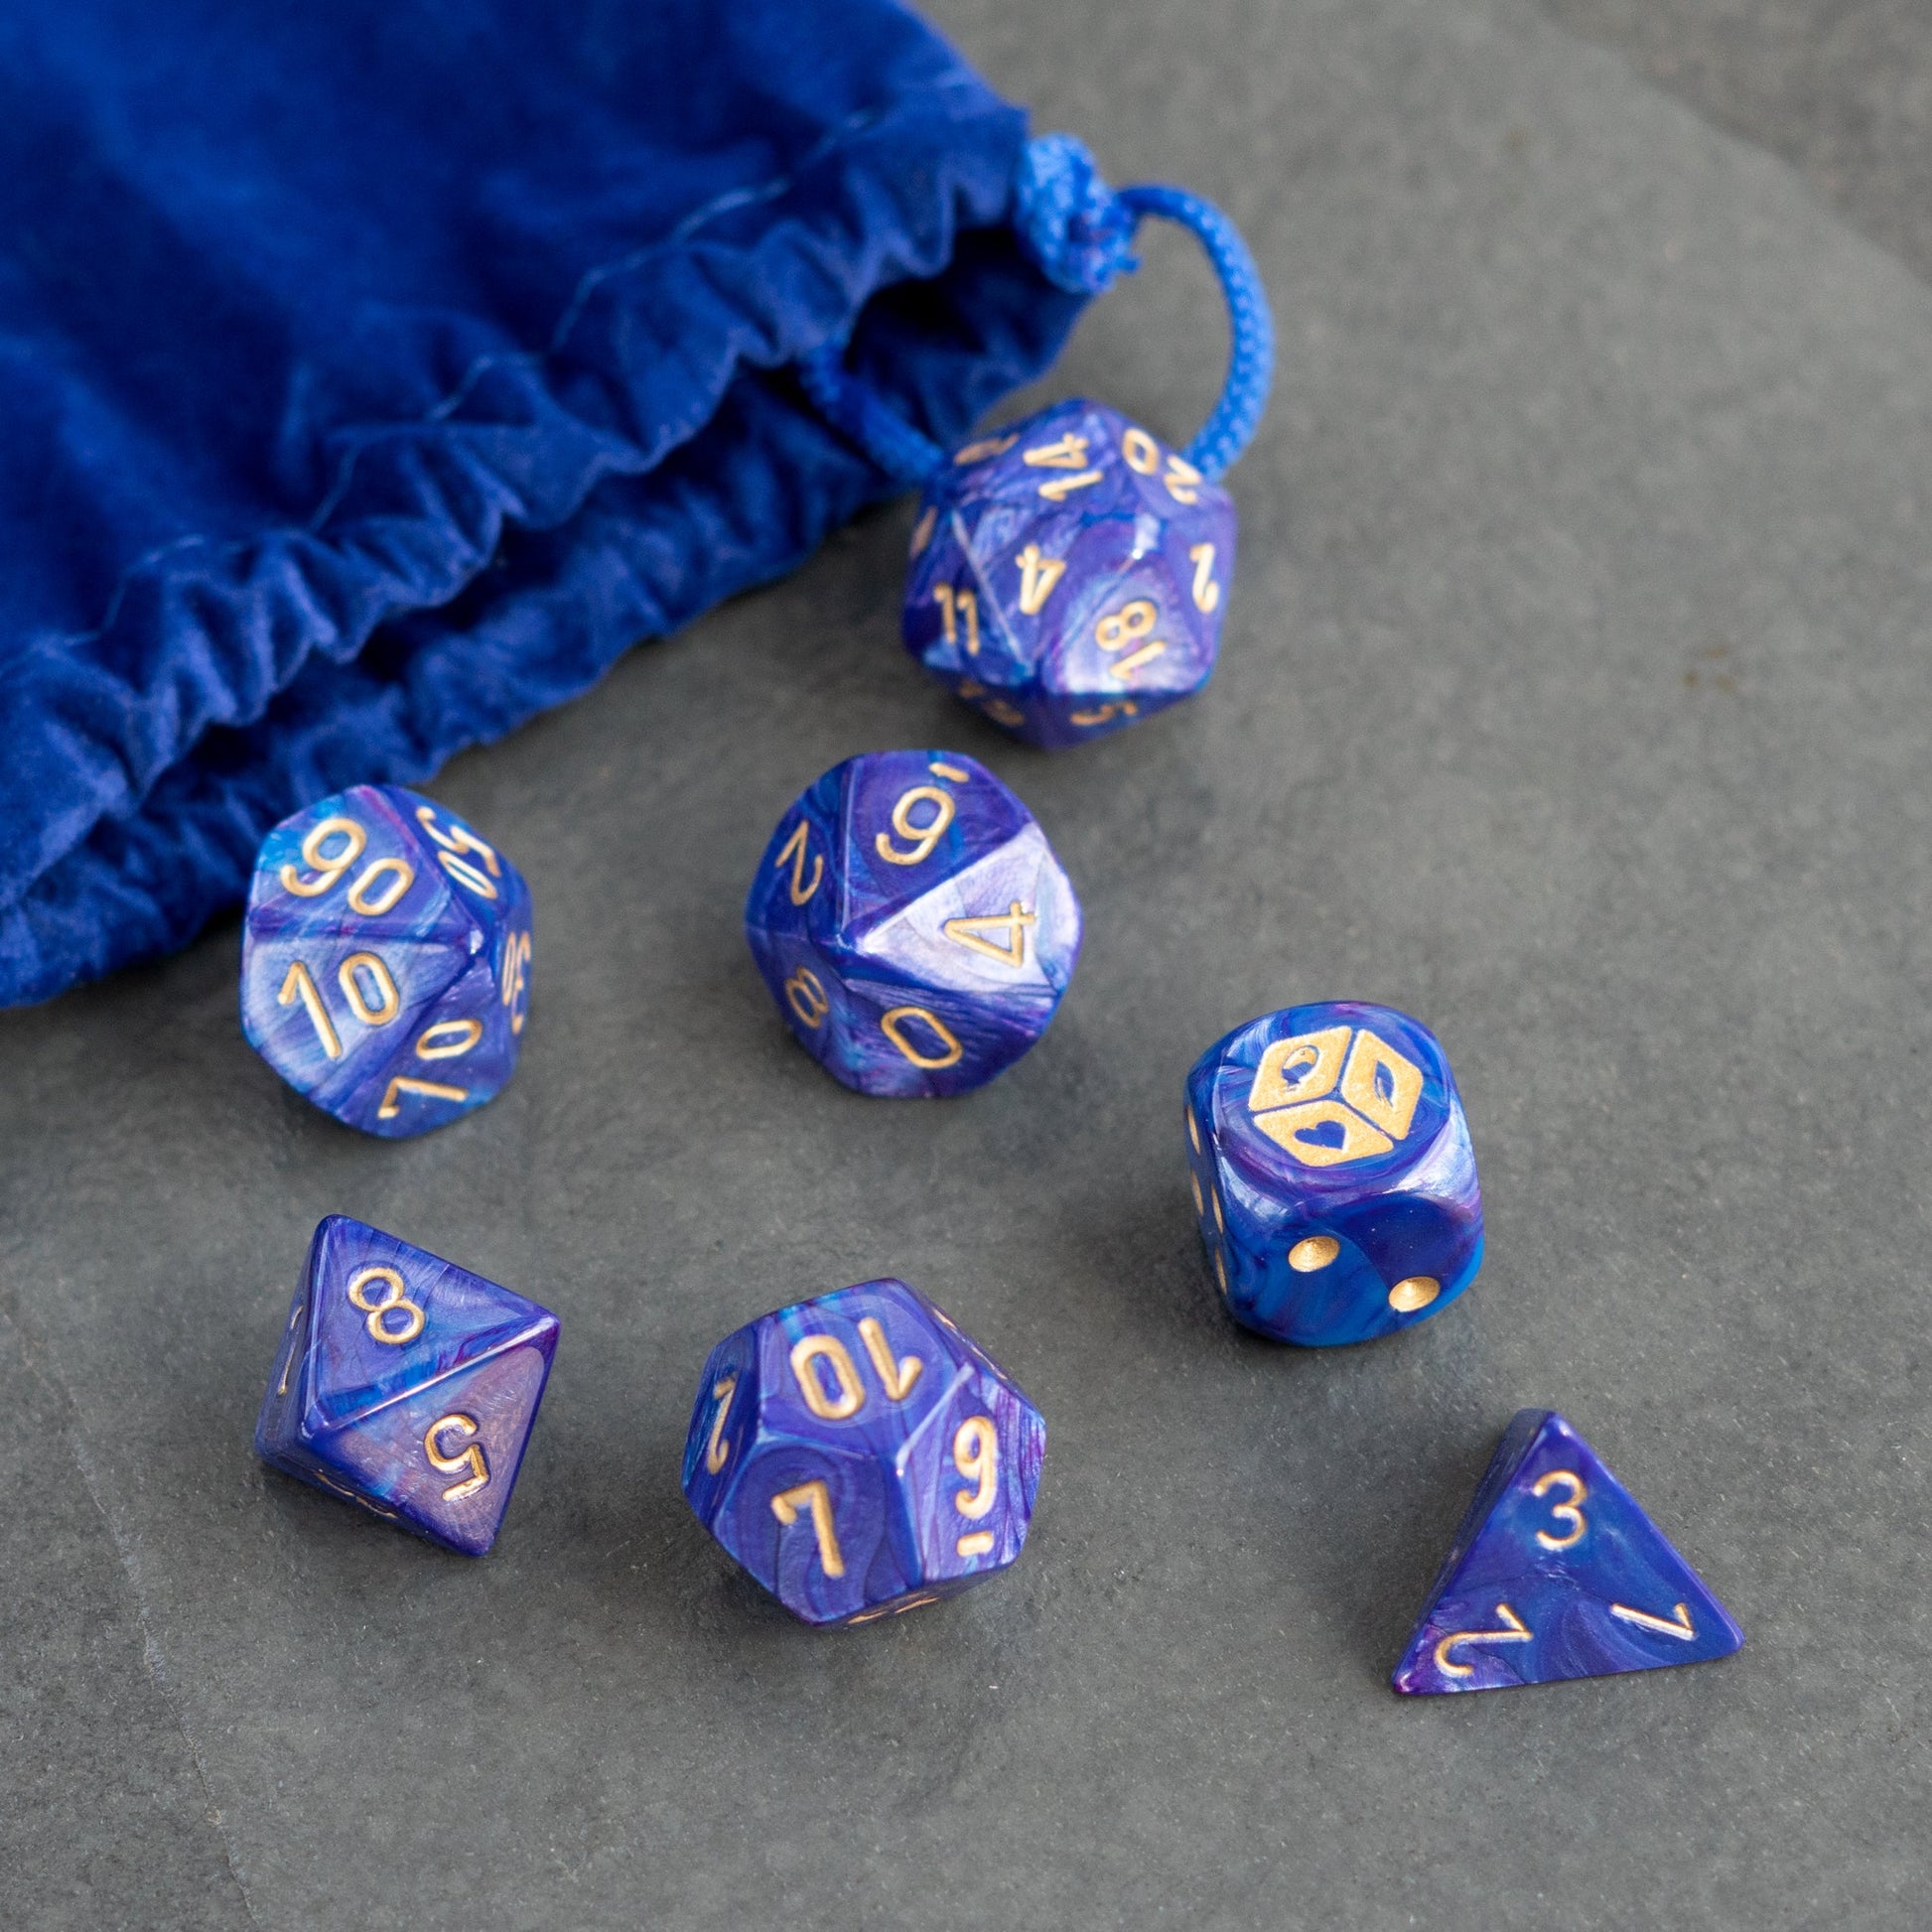 Arcane Dungeon Master Dice Set (Includes Bag) - Geek Therapeutics